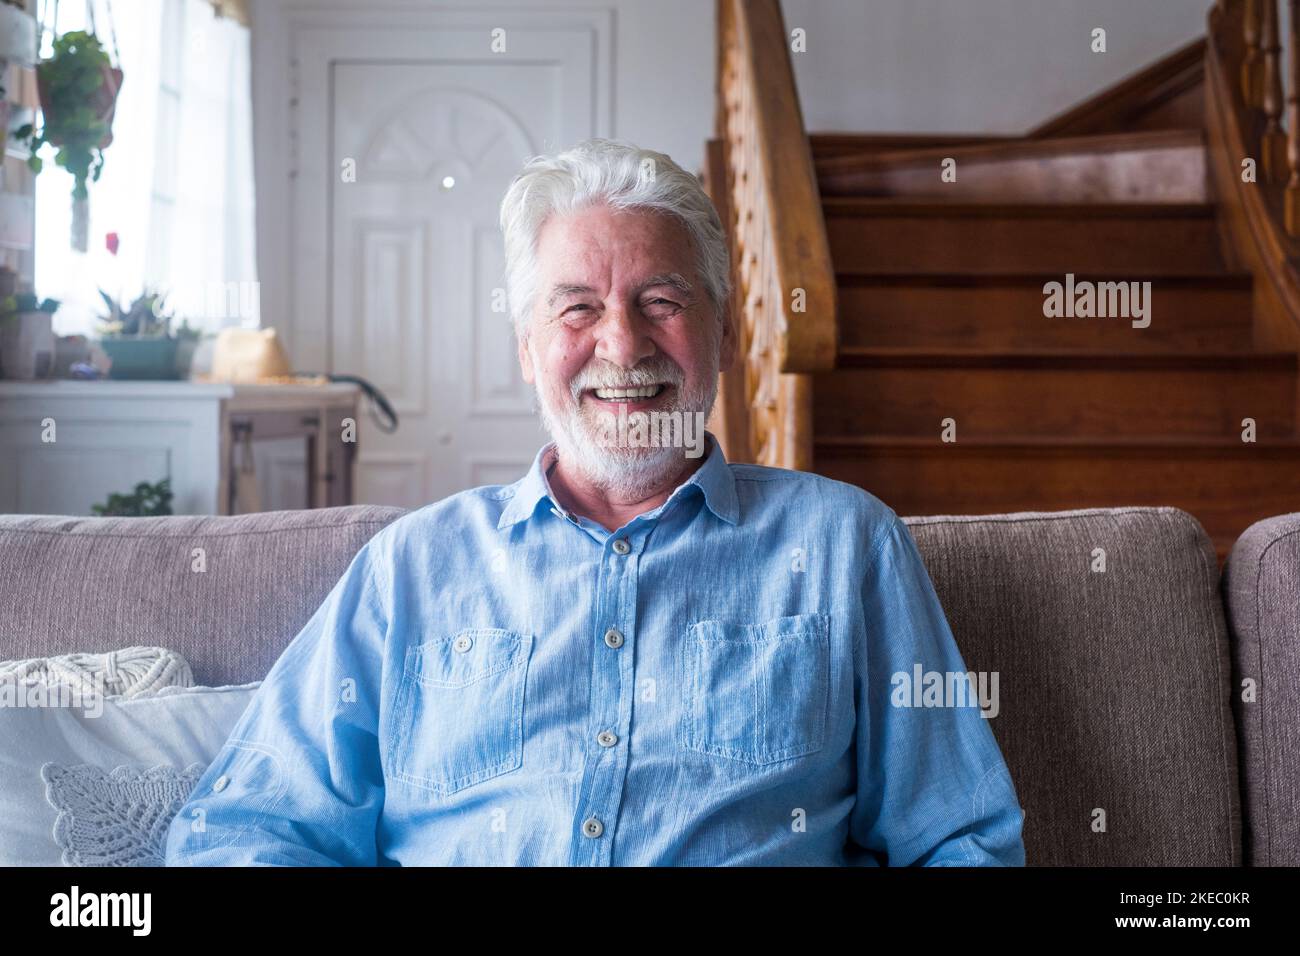 Portrait of happy senior man sitting on sofa in the living room of house in front of wooden staircase. Old male smiling while relaxing on couch and looking at camera Stock Photo